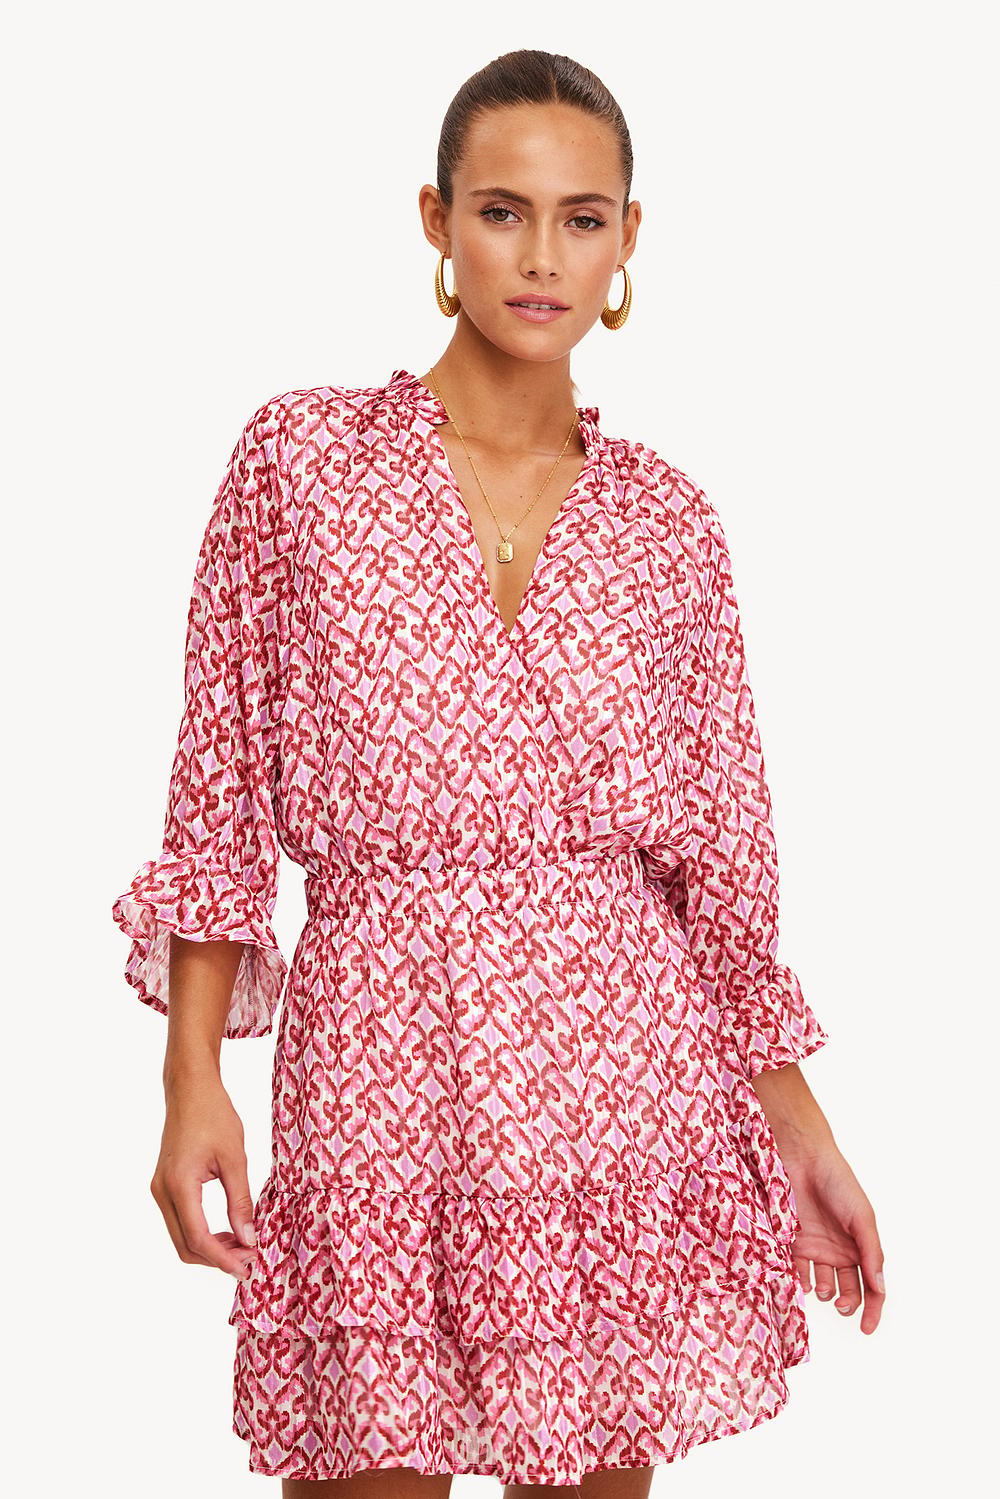 Pink dress with graphic print